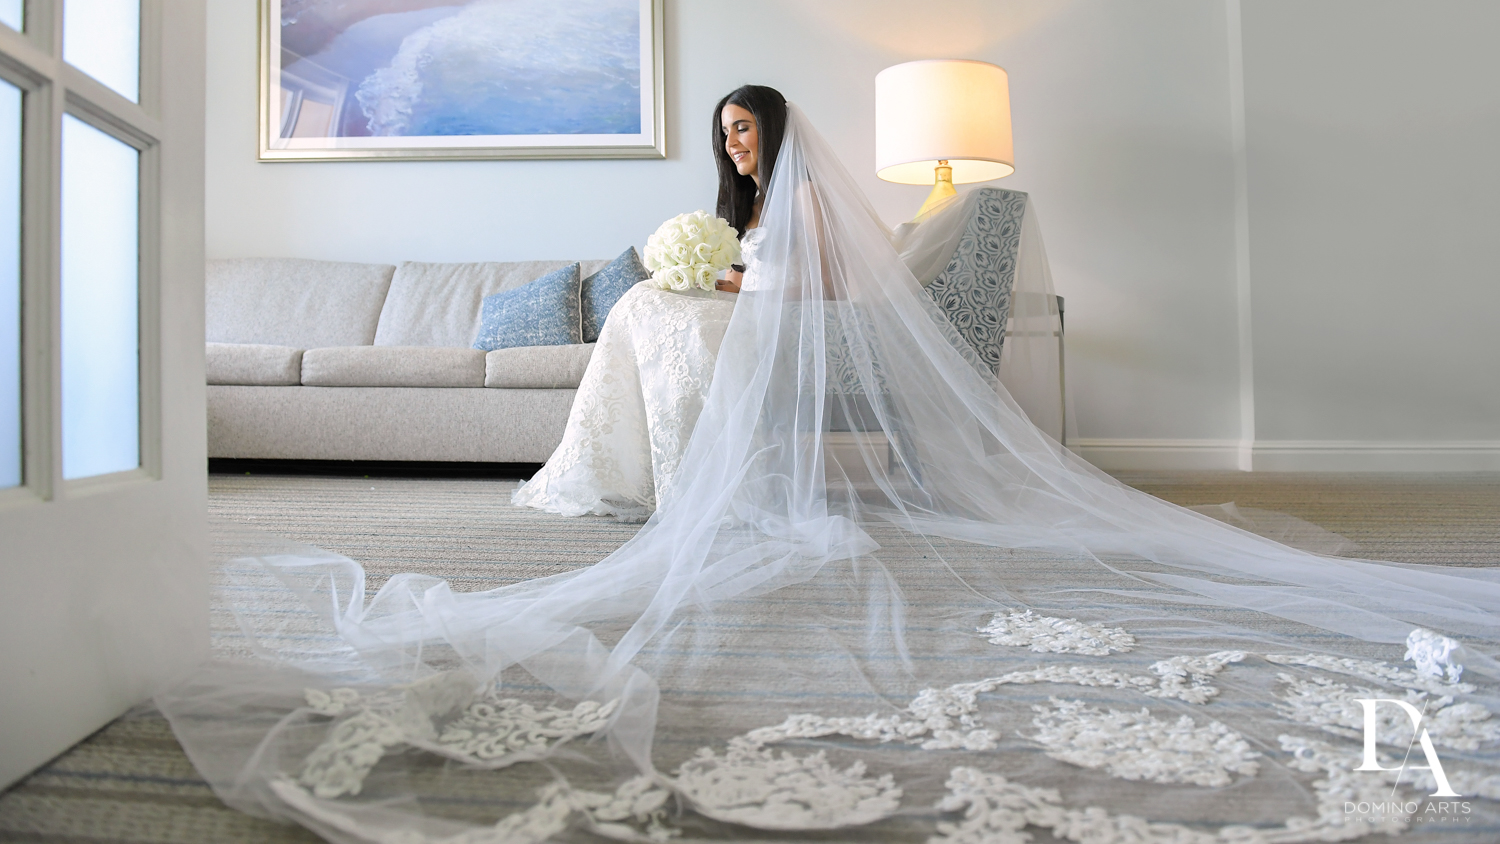 bridal gown at A Ritz Carlton Wedding in Key Biscayne by Domino Arts Photography